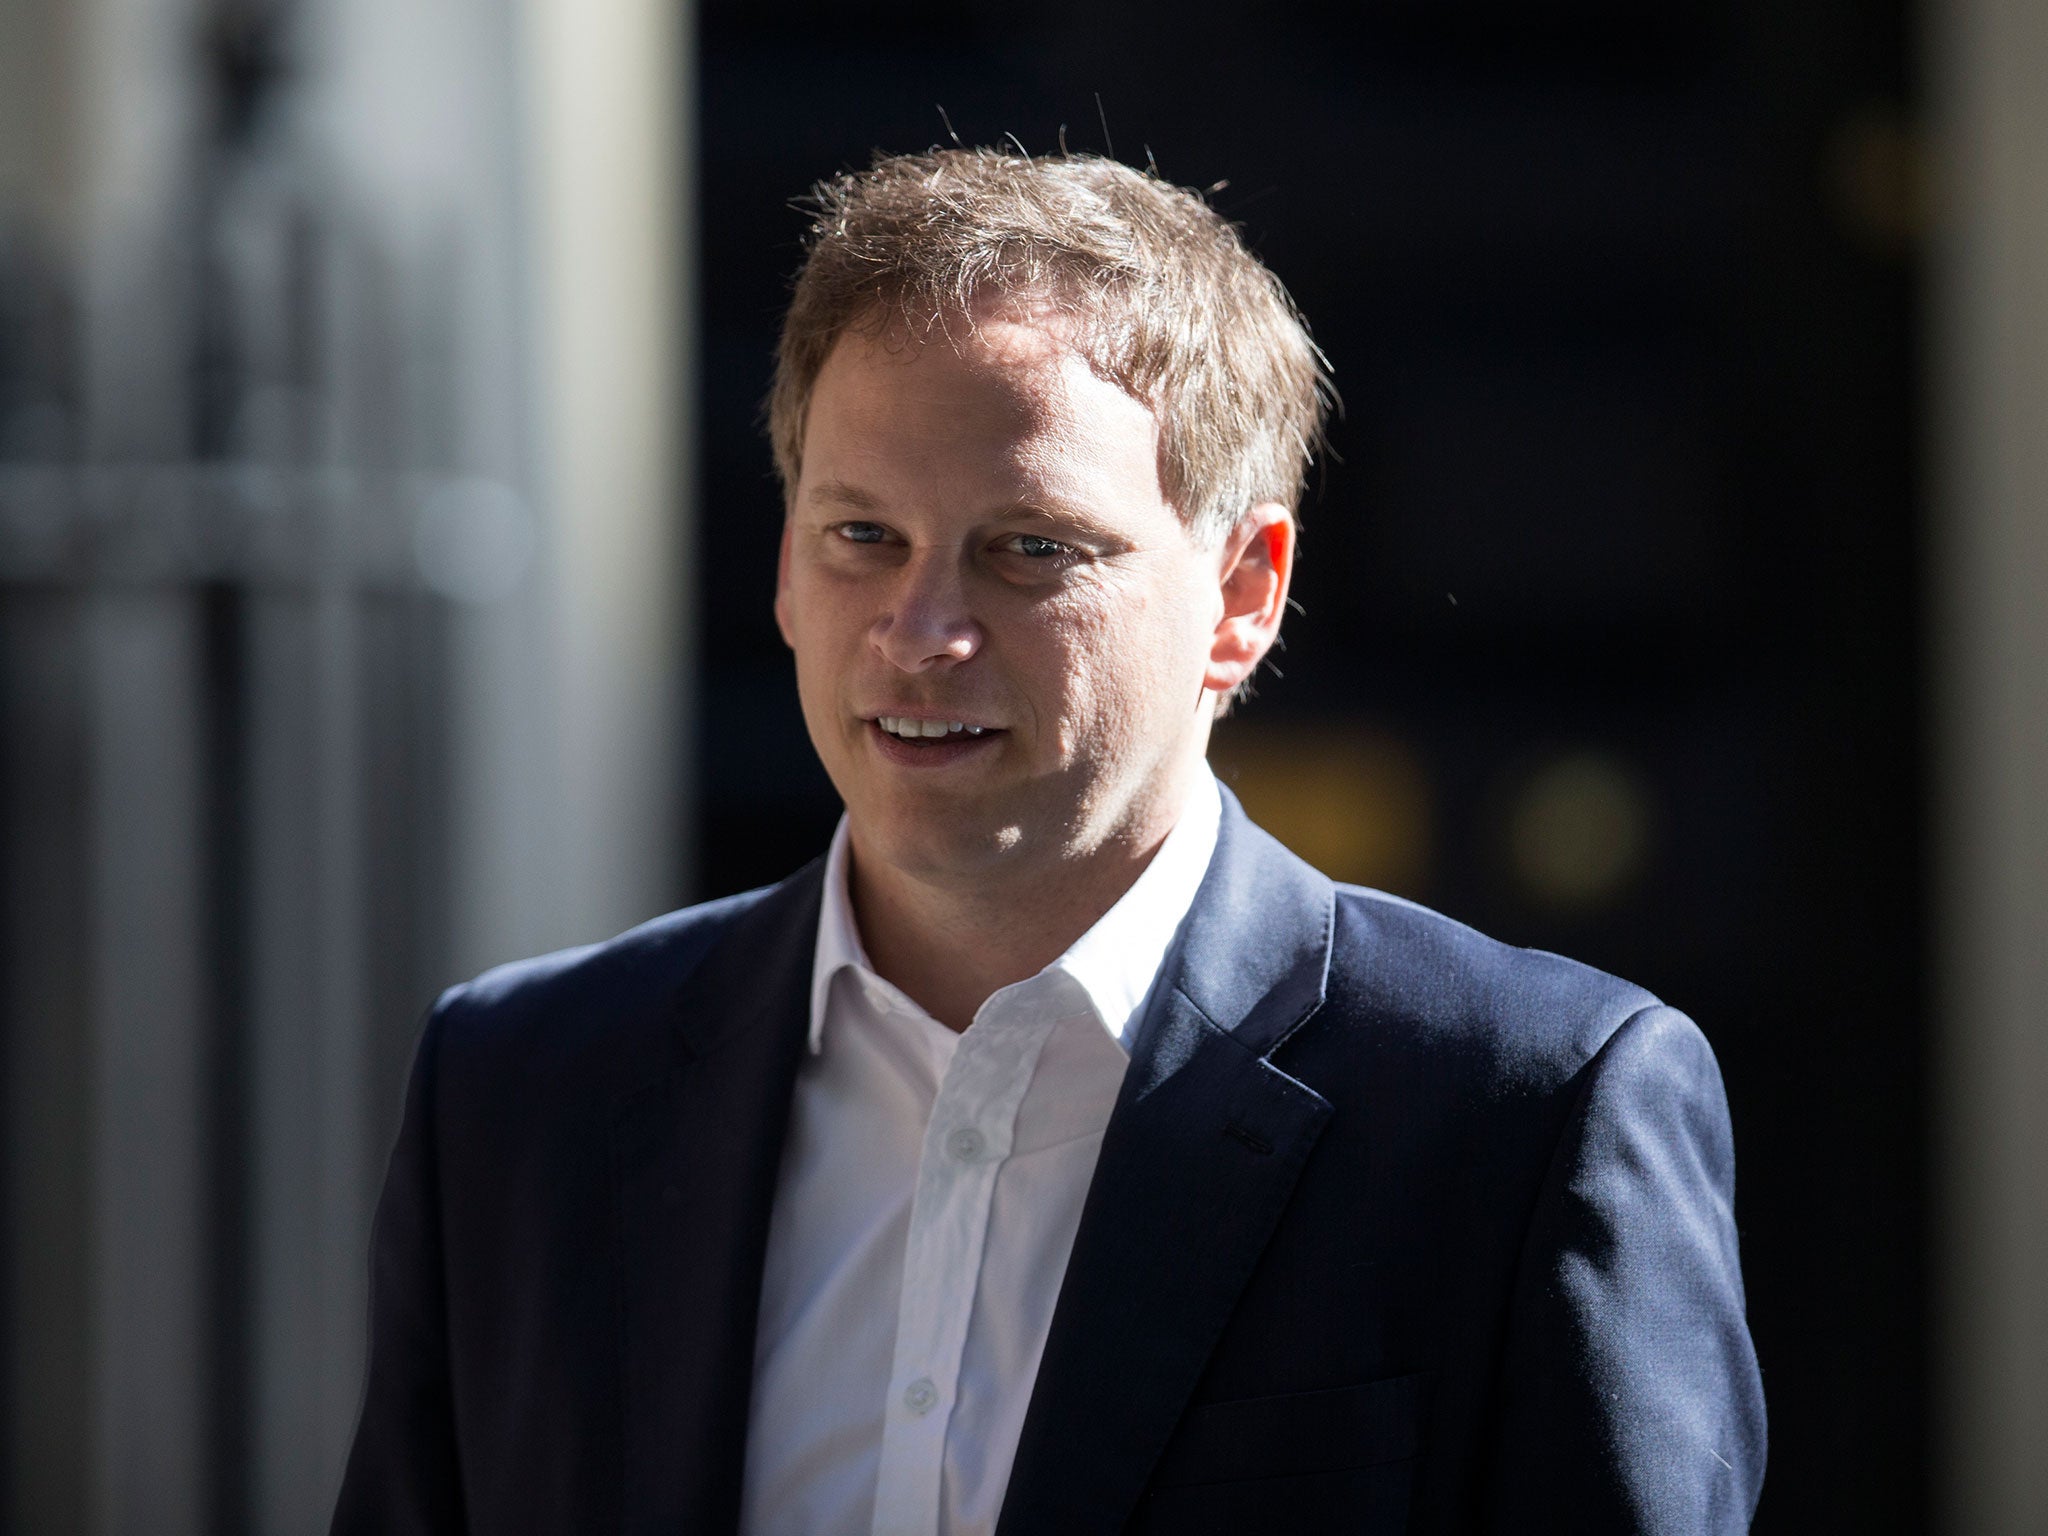 Conservative Party chairman Grant Shapps admitted there was a “difference of opinion” over the guidance to be issued as the Government tries to prevent the radicalisation of young people